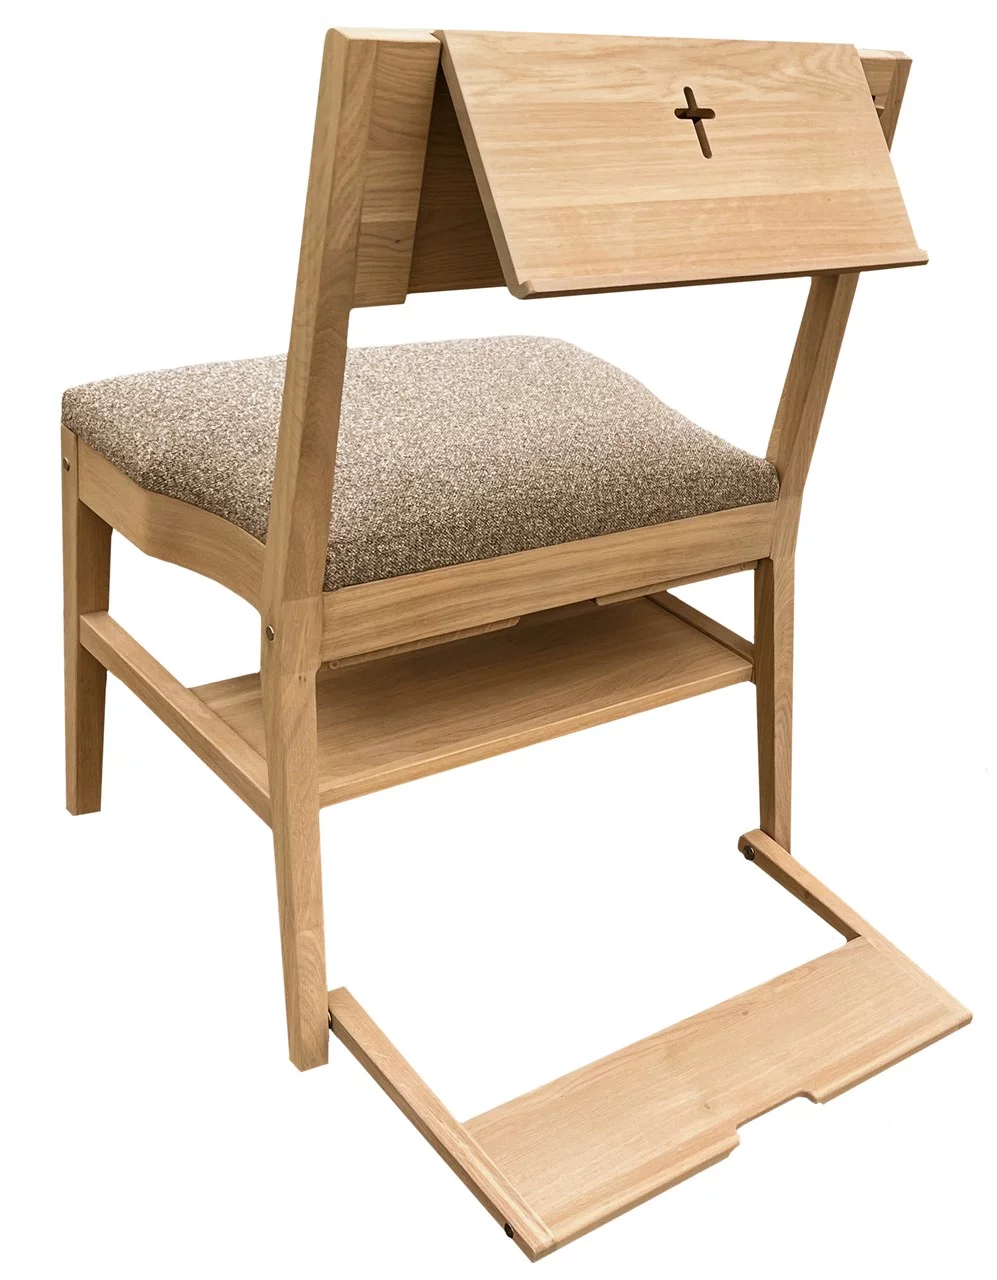 Oak church chair ZOE with a complete range of accessories — lectern, hook, kneeler, connection system, shelf under the seat and seat upholstery